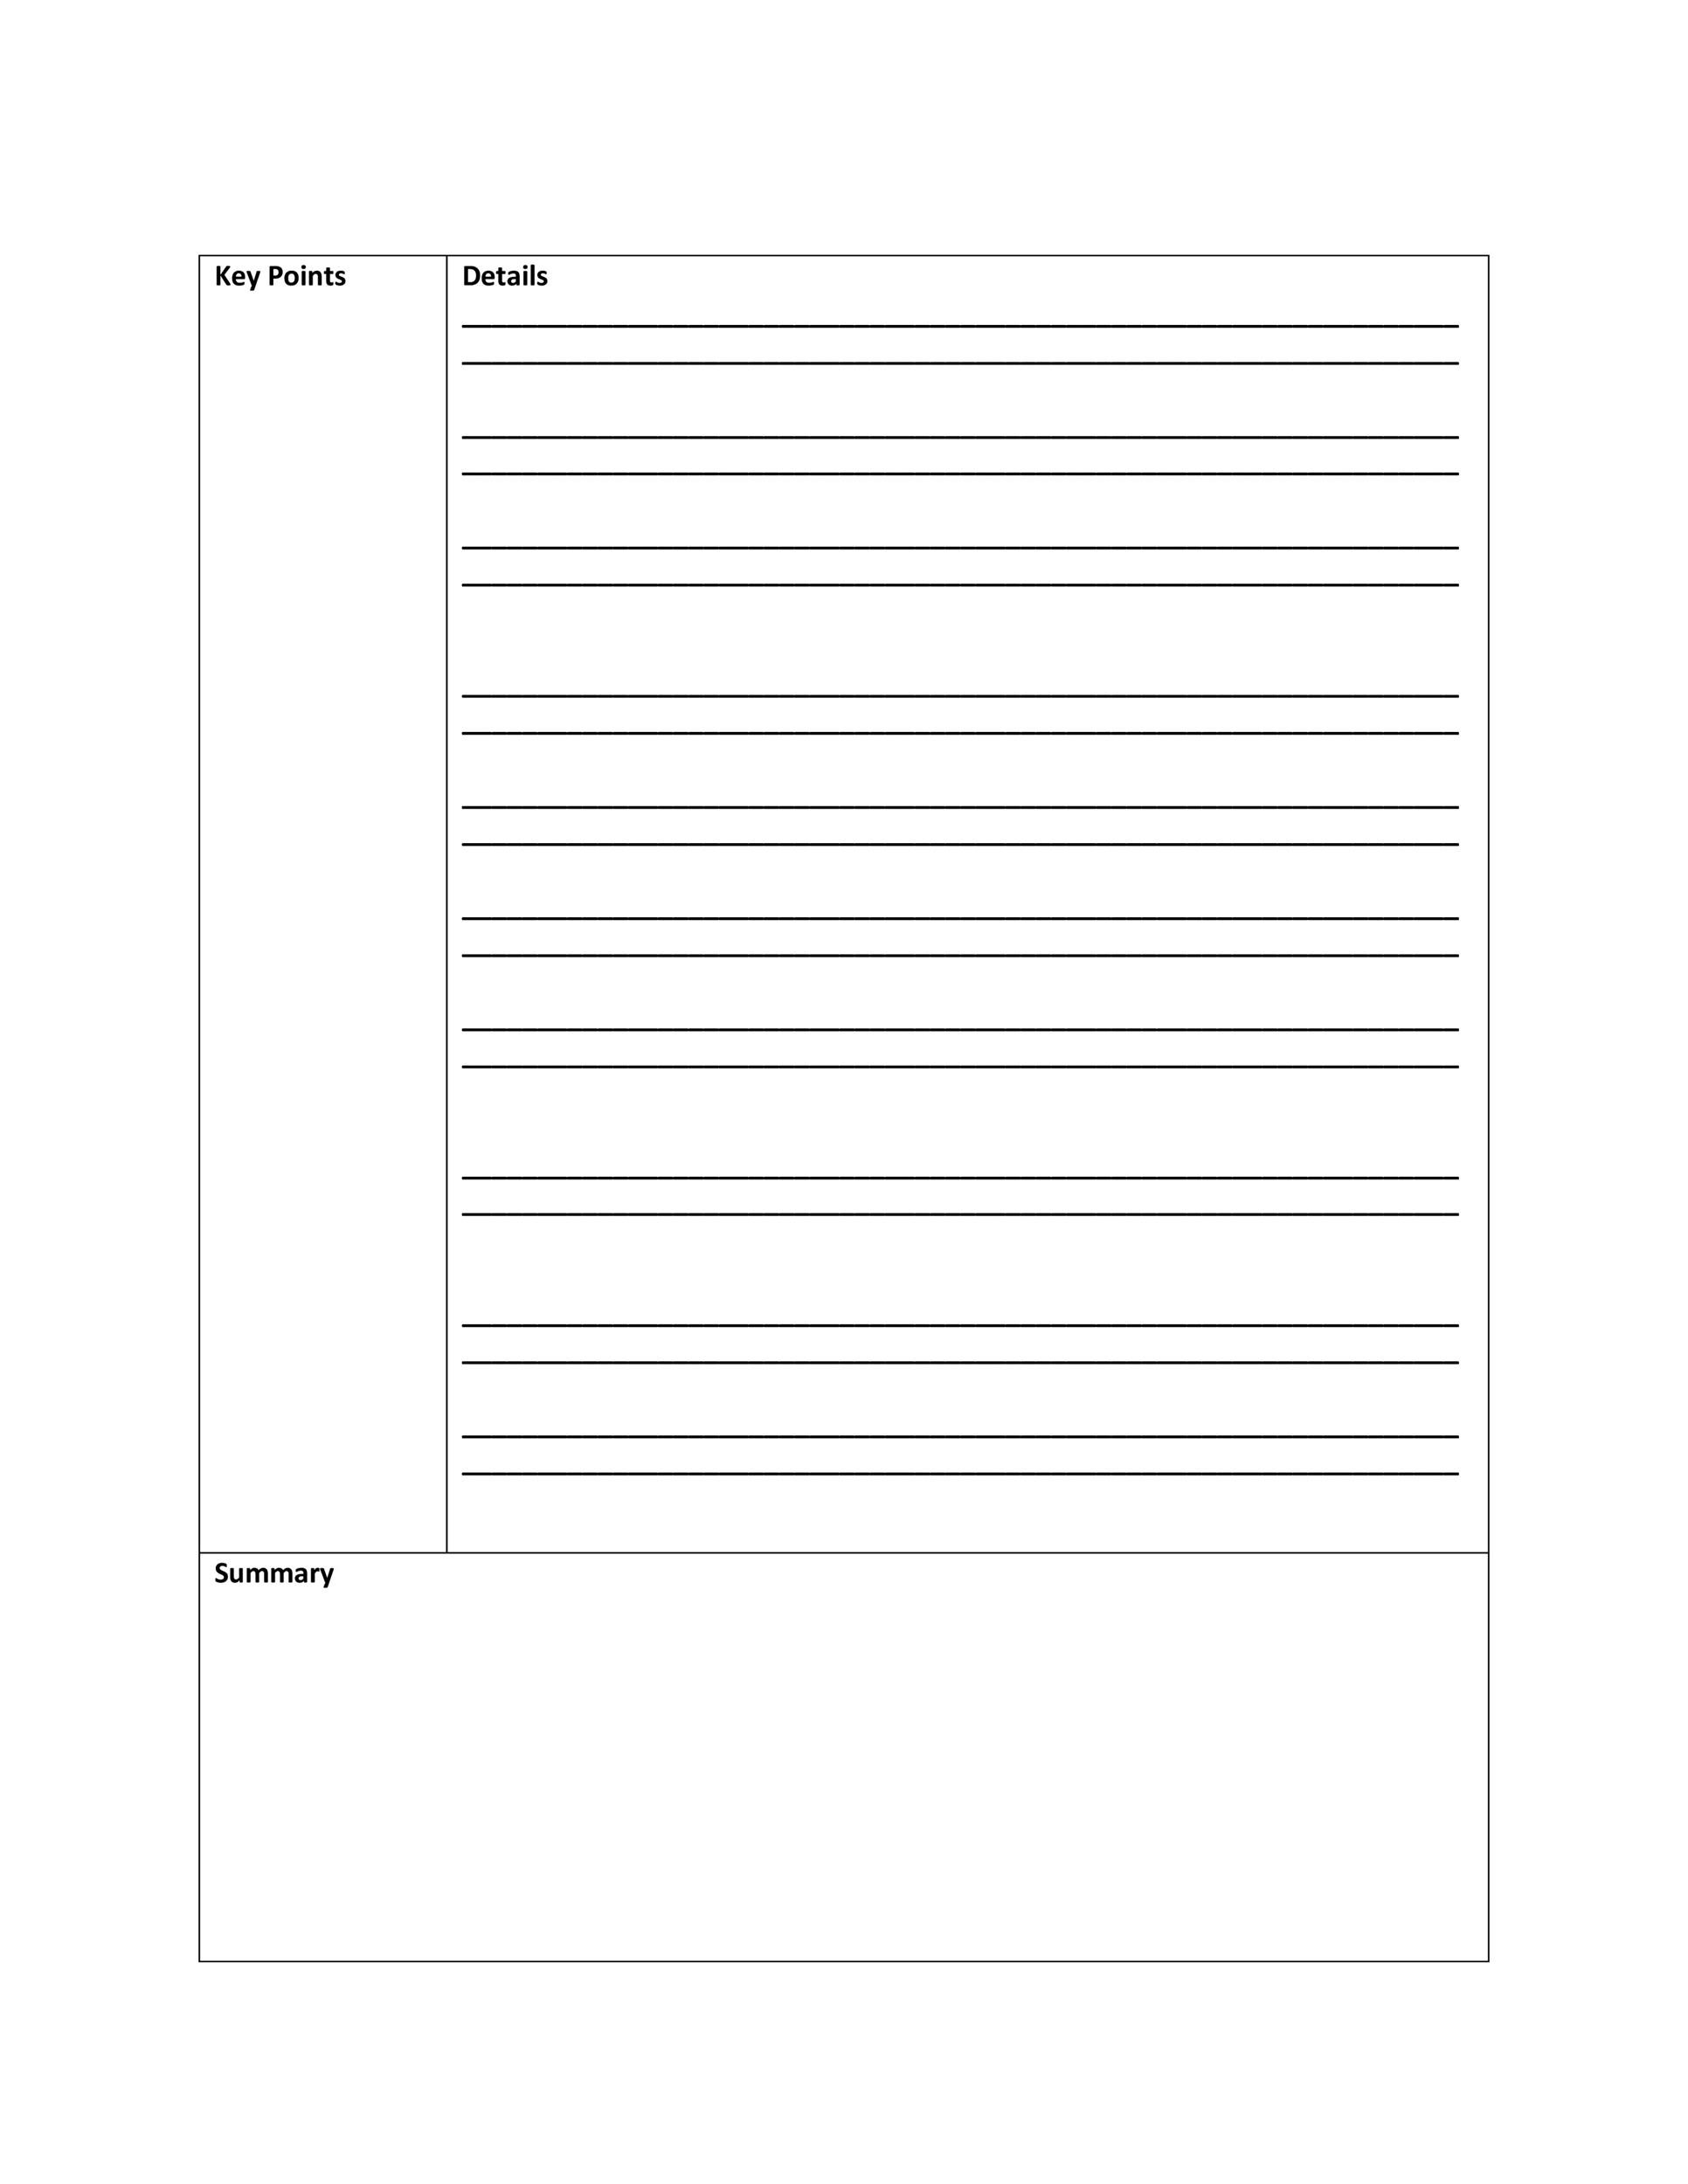 Cornell Style Notes Template from templatelab.com